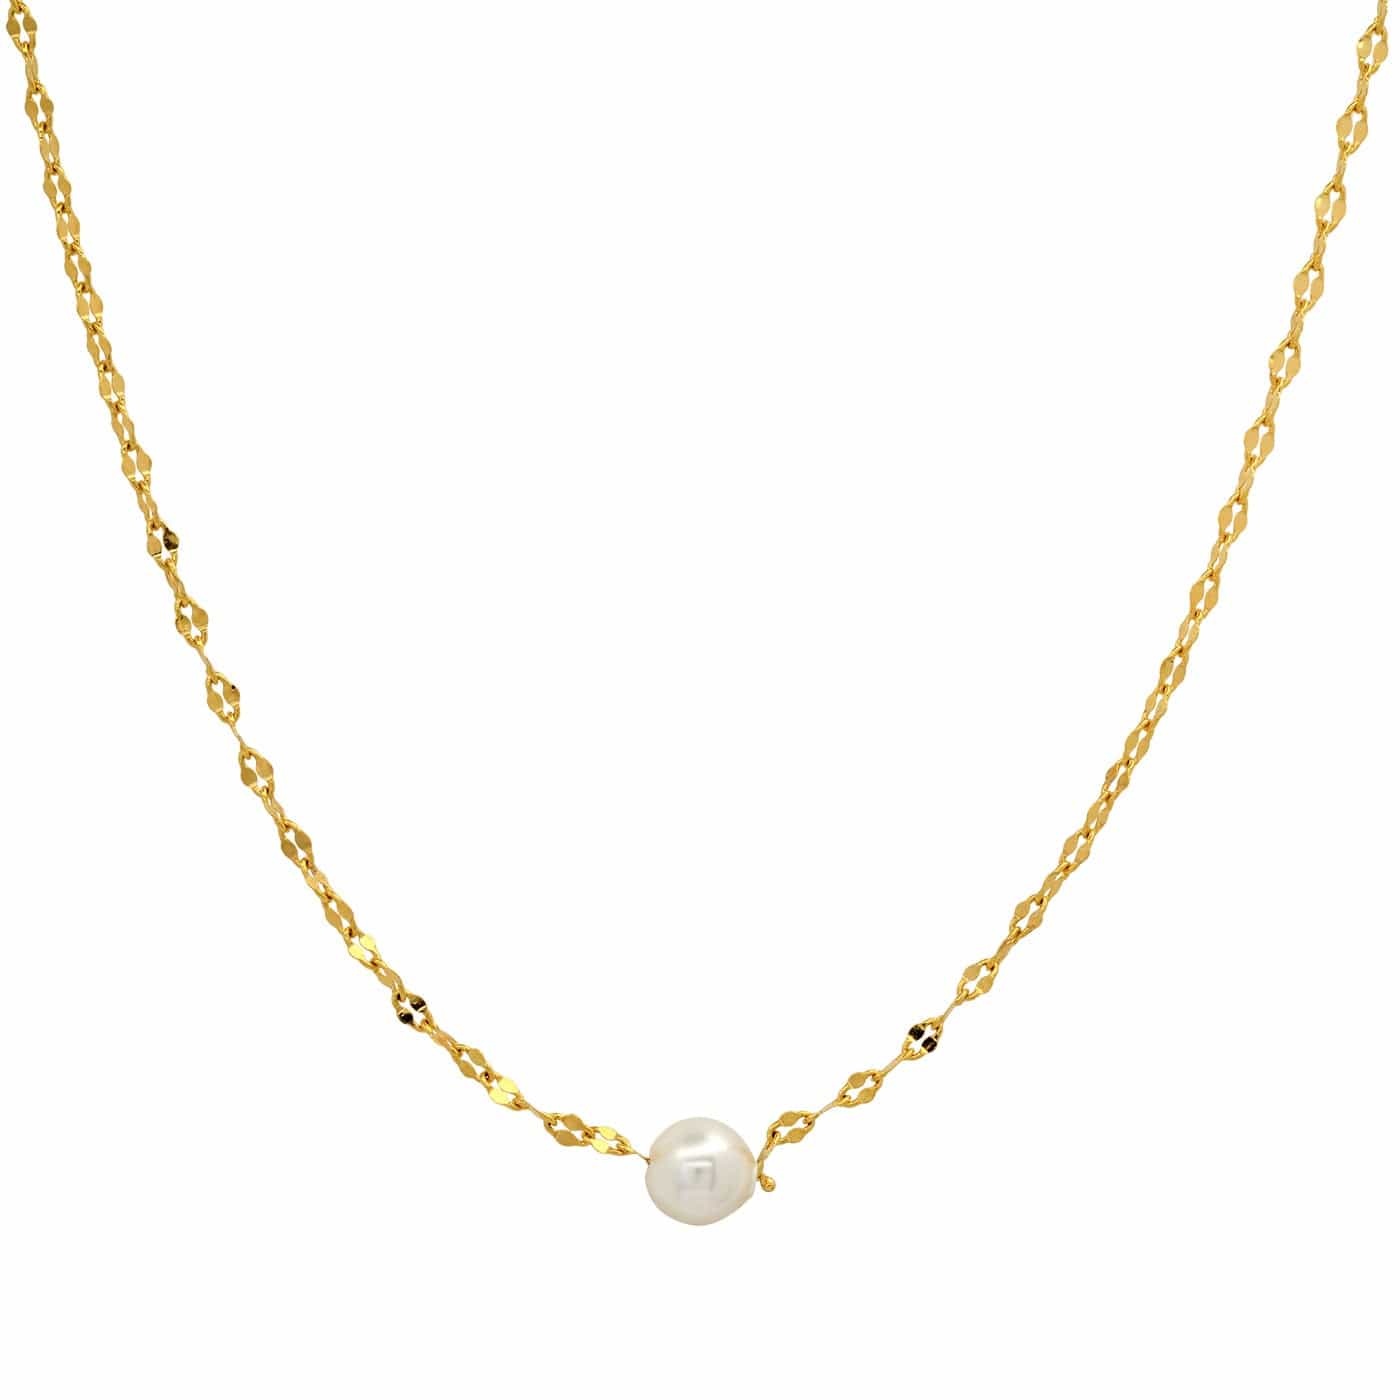 TAI JEWELRY Necklace Gold Vermeil Chain with Single Pearl